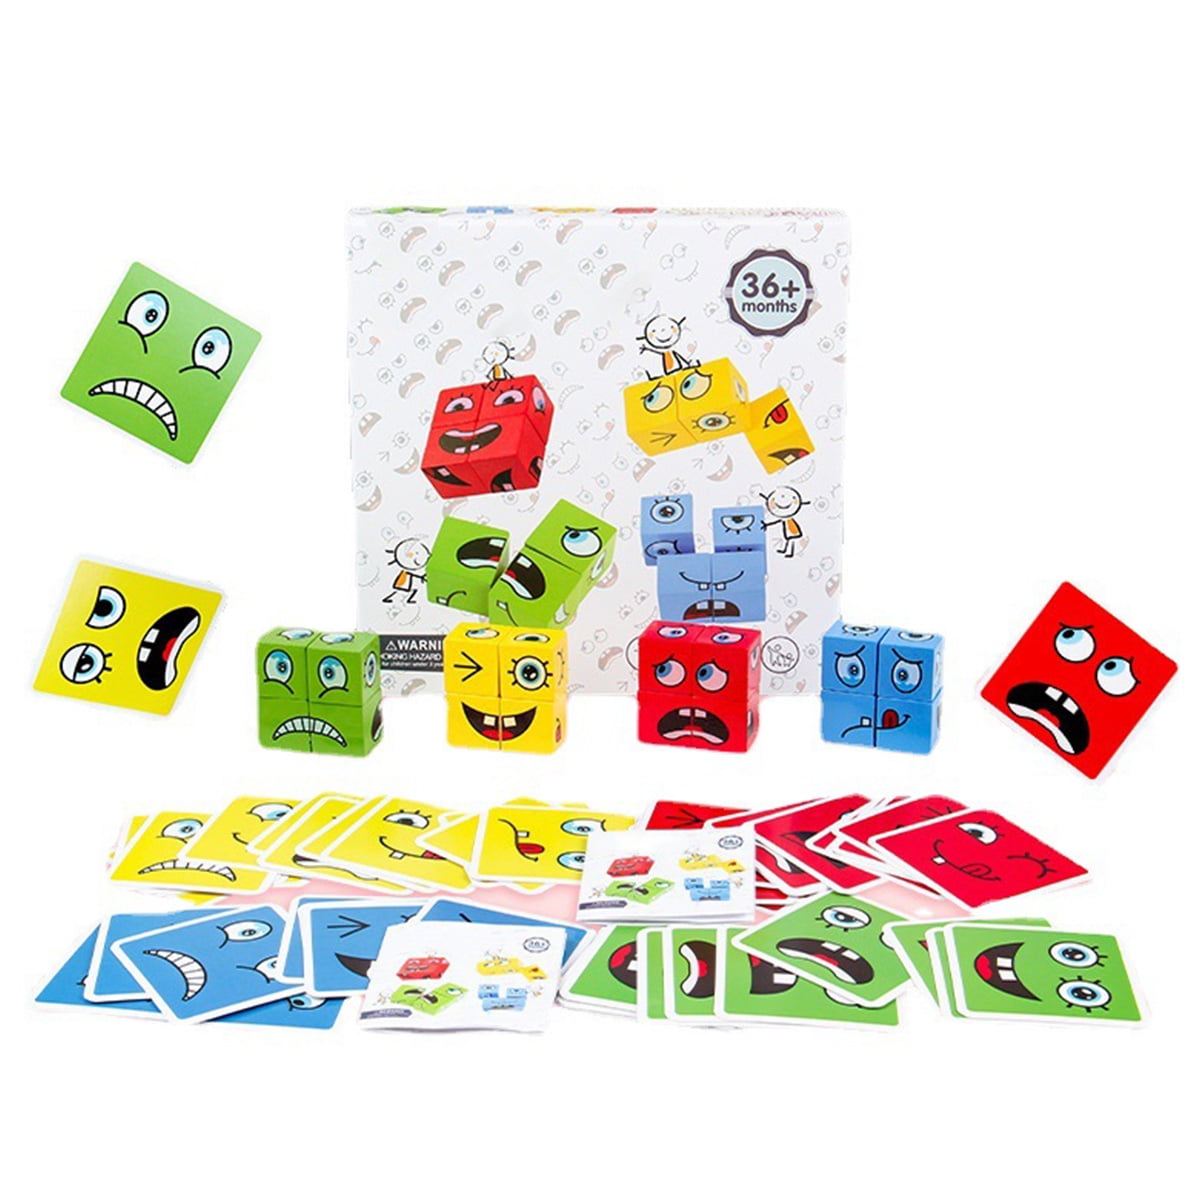 64 Cards With Bell FUFUFA Clap Bell and Have Fun Expression Blocks Wooden Puzzle Building Cubes Funny Faces